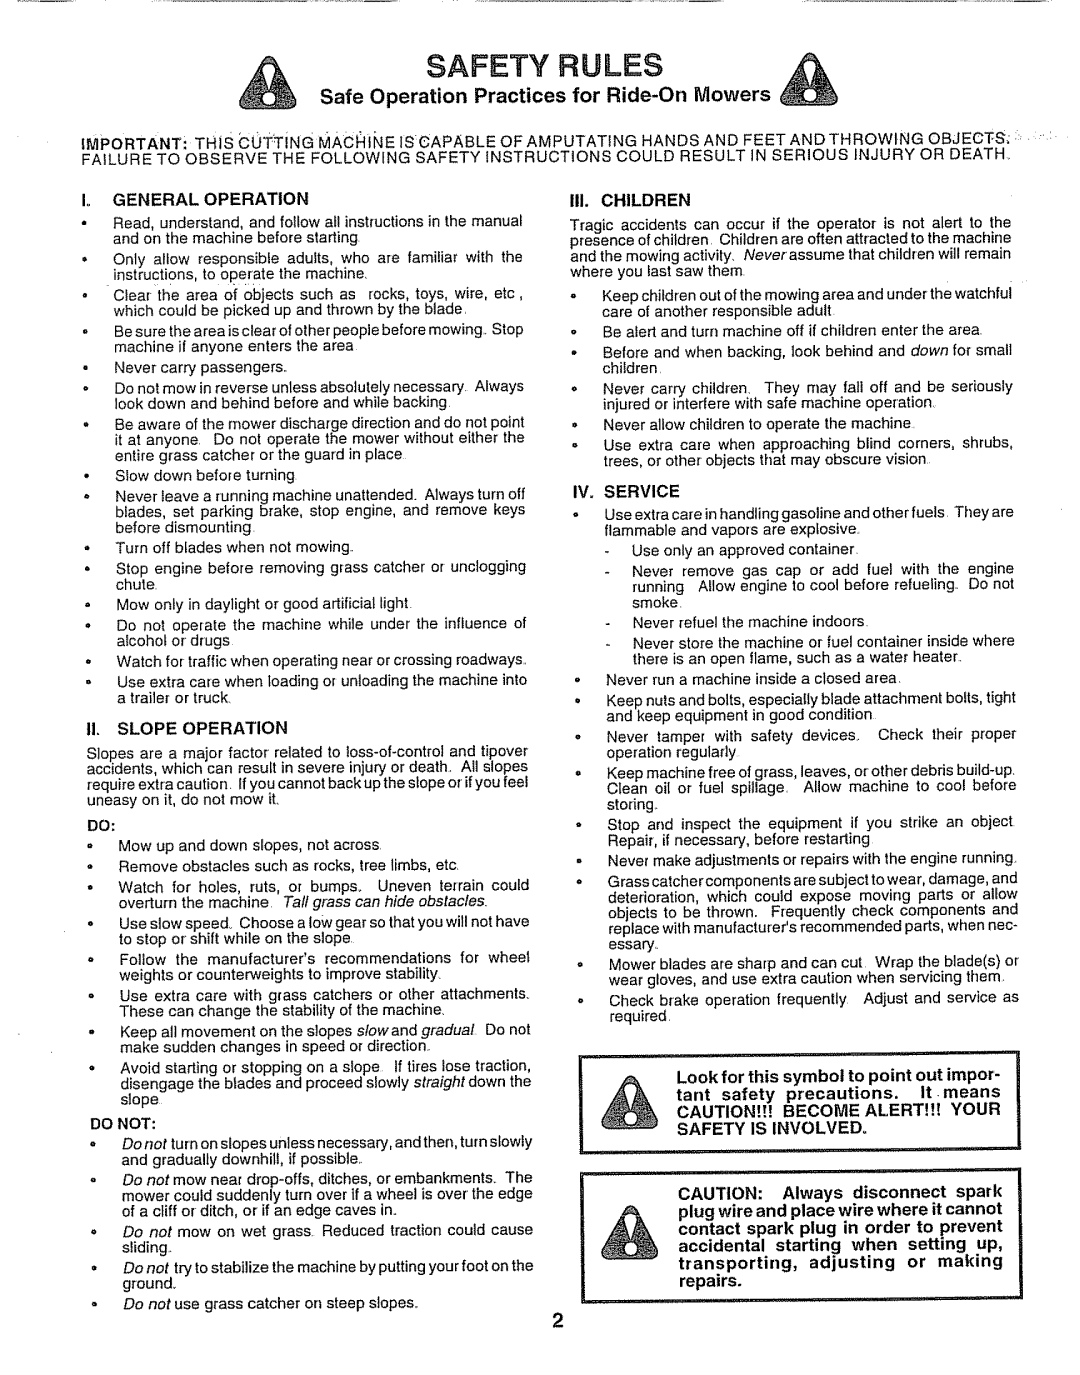 Sears 917.257552 manual Safety Rules, Safe Operation Practices for Ride-OnMowers, transporting, adjusting or making repairs 